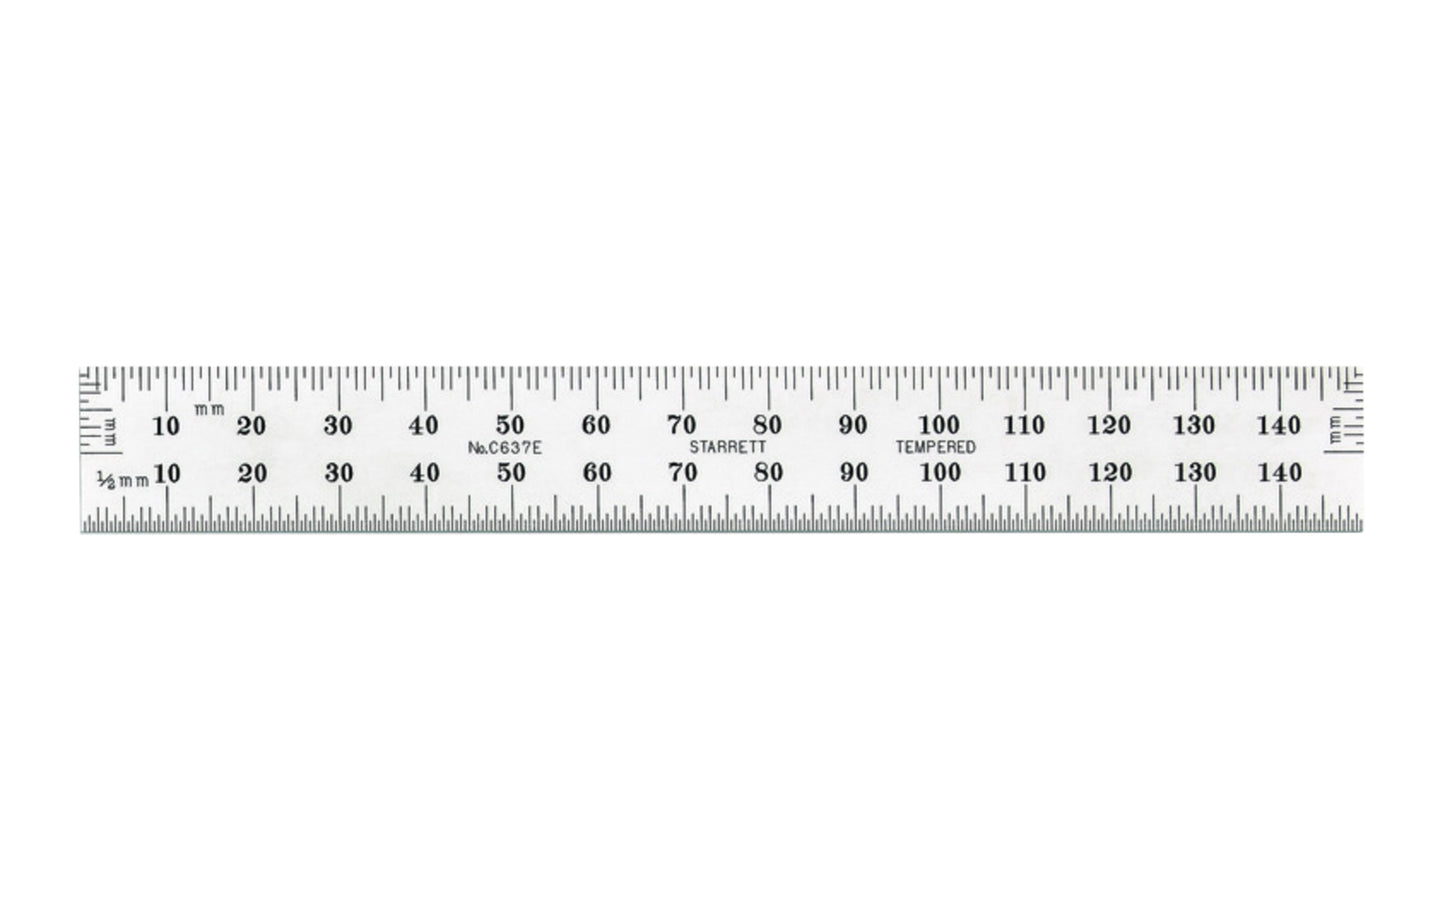 Starrett 6" End Read Rule - 1.0 mm, 0.5 mm Grads. 150mm Full-Flexible Steel Rule with Millimeter Graduation features a satin chrome finish. Graduations at mm and 1/2mm on both sides; mm on both ends on one side. Includes end graduations. 150mm, No. 37 Grad, End Graduations graduations.  Made in USA. Model C637E-150.